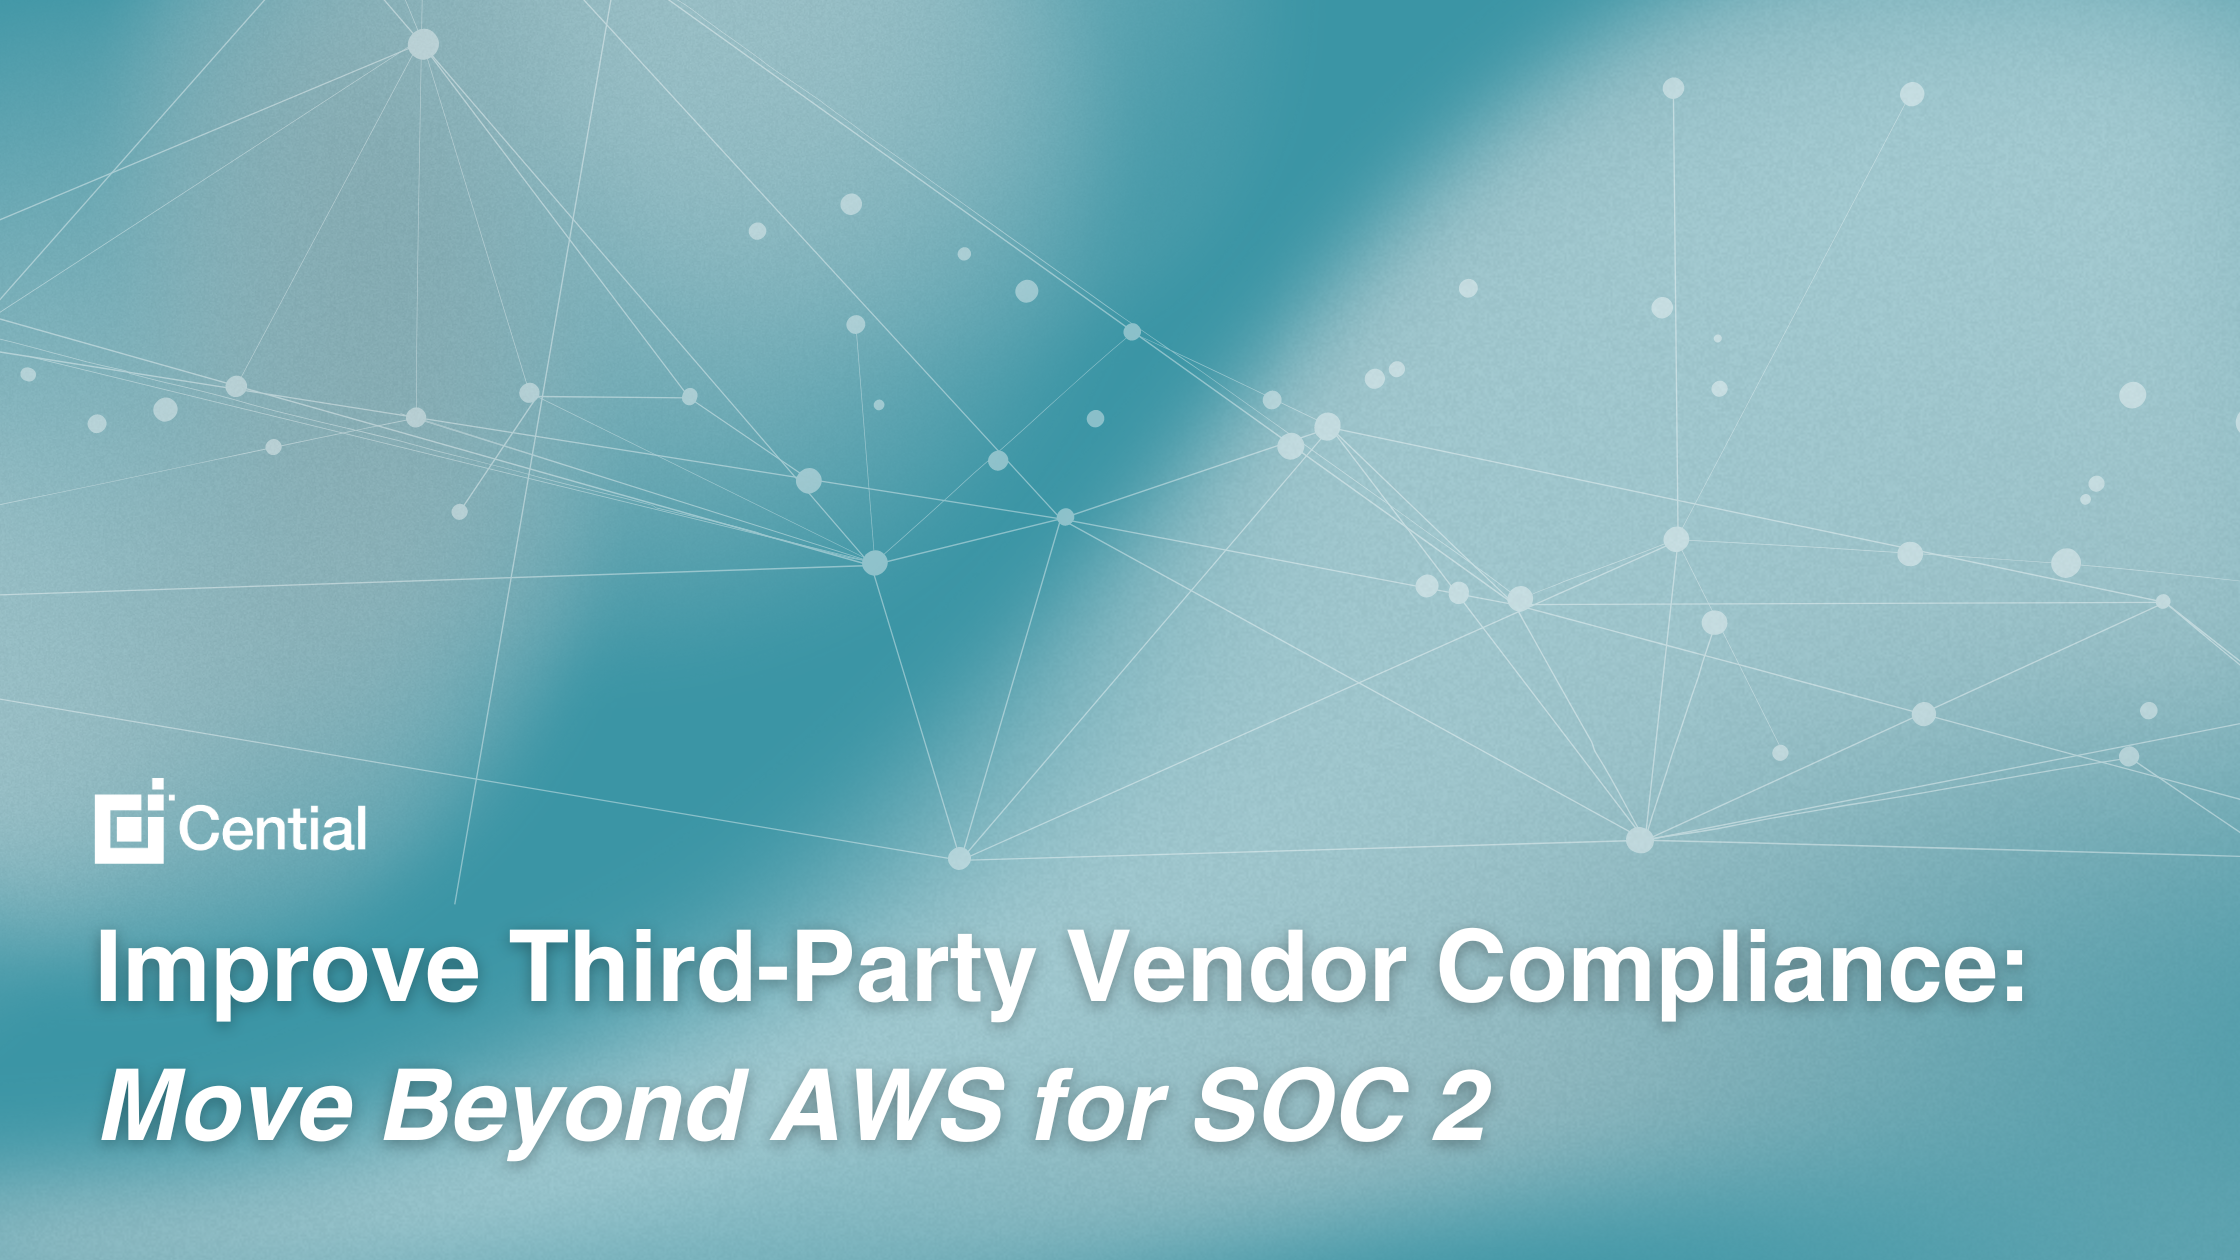 Improve Third-Party Vendor Compliance: Move Beyond AWS for SOC 2